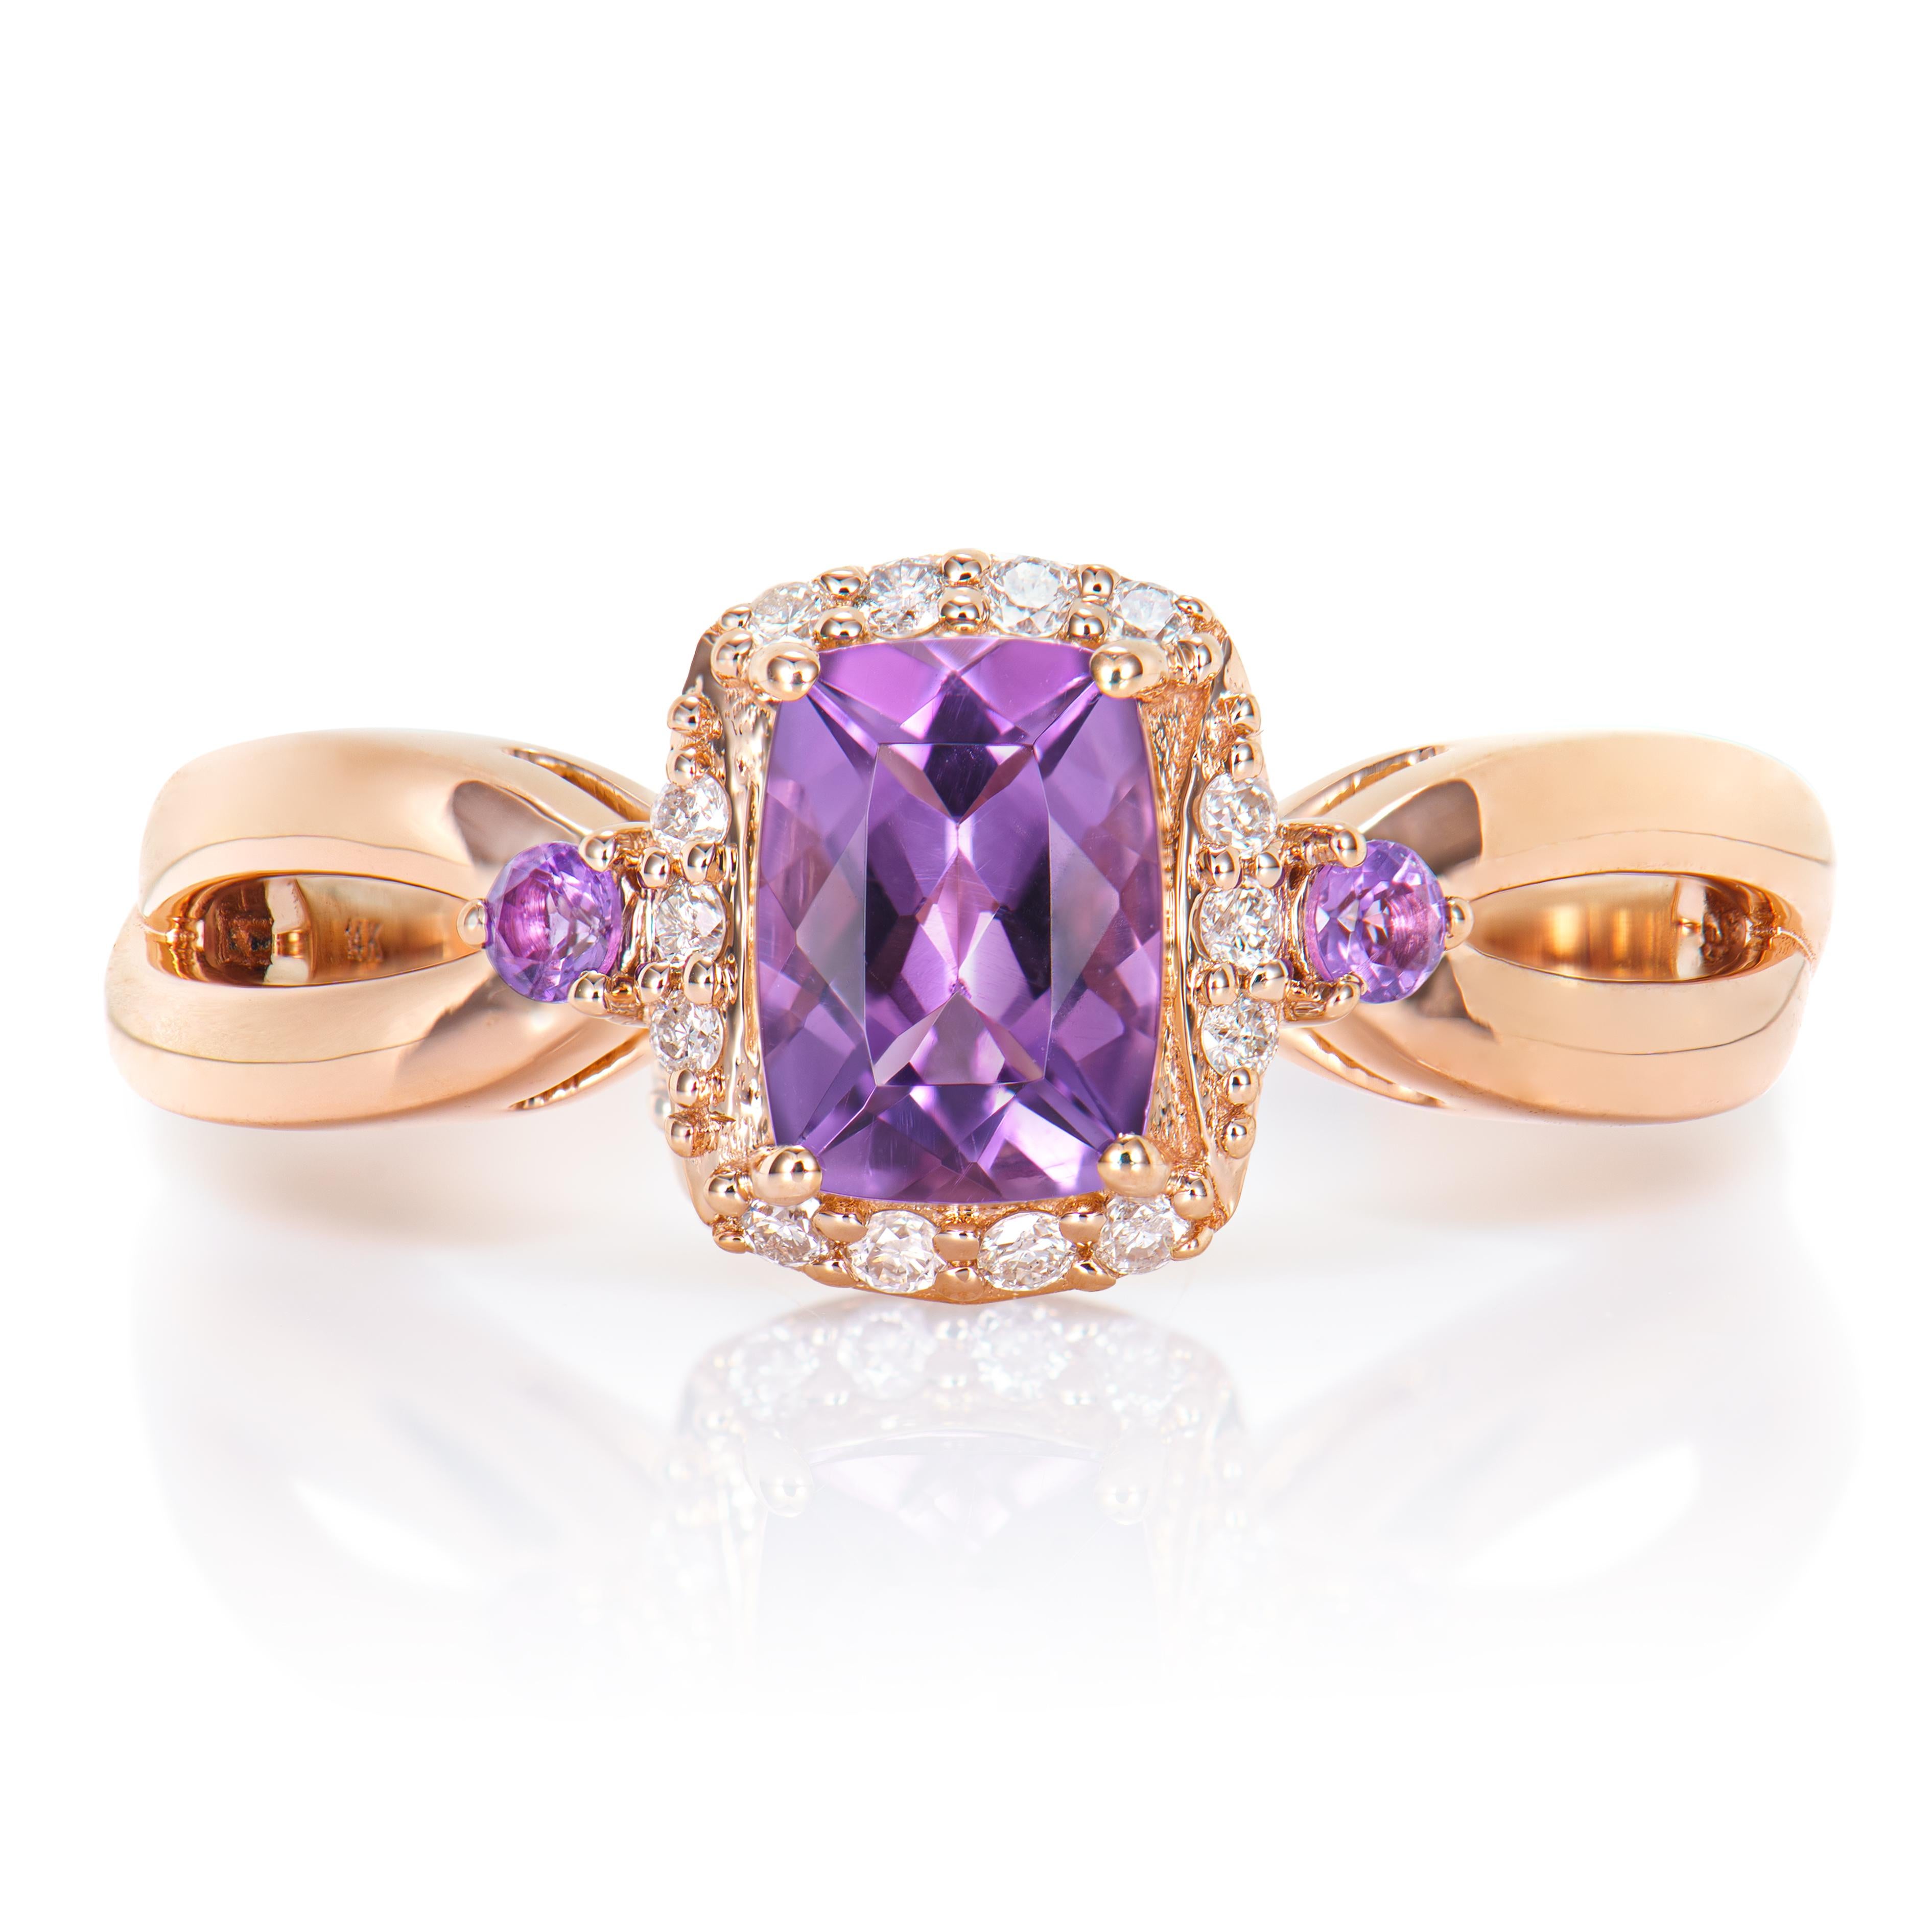 Contemporary 0.84 Carat Amethyst Fancy Ring in 14Karat Rose Gold with White Diamond.   For Sale